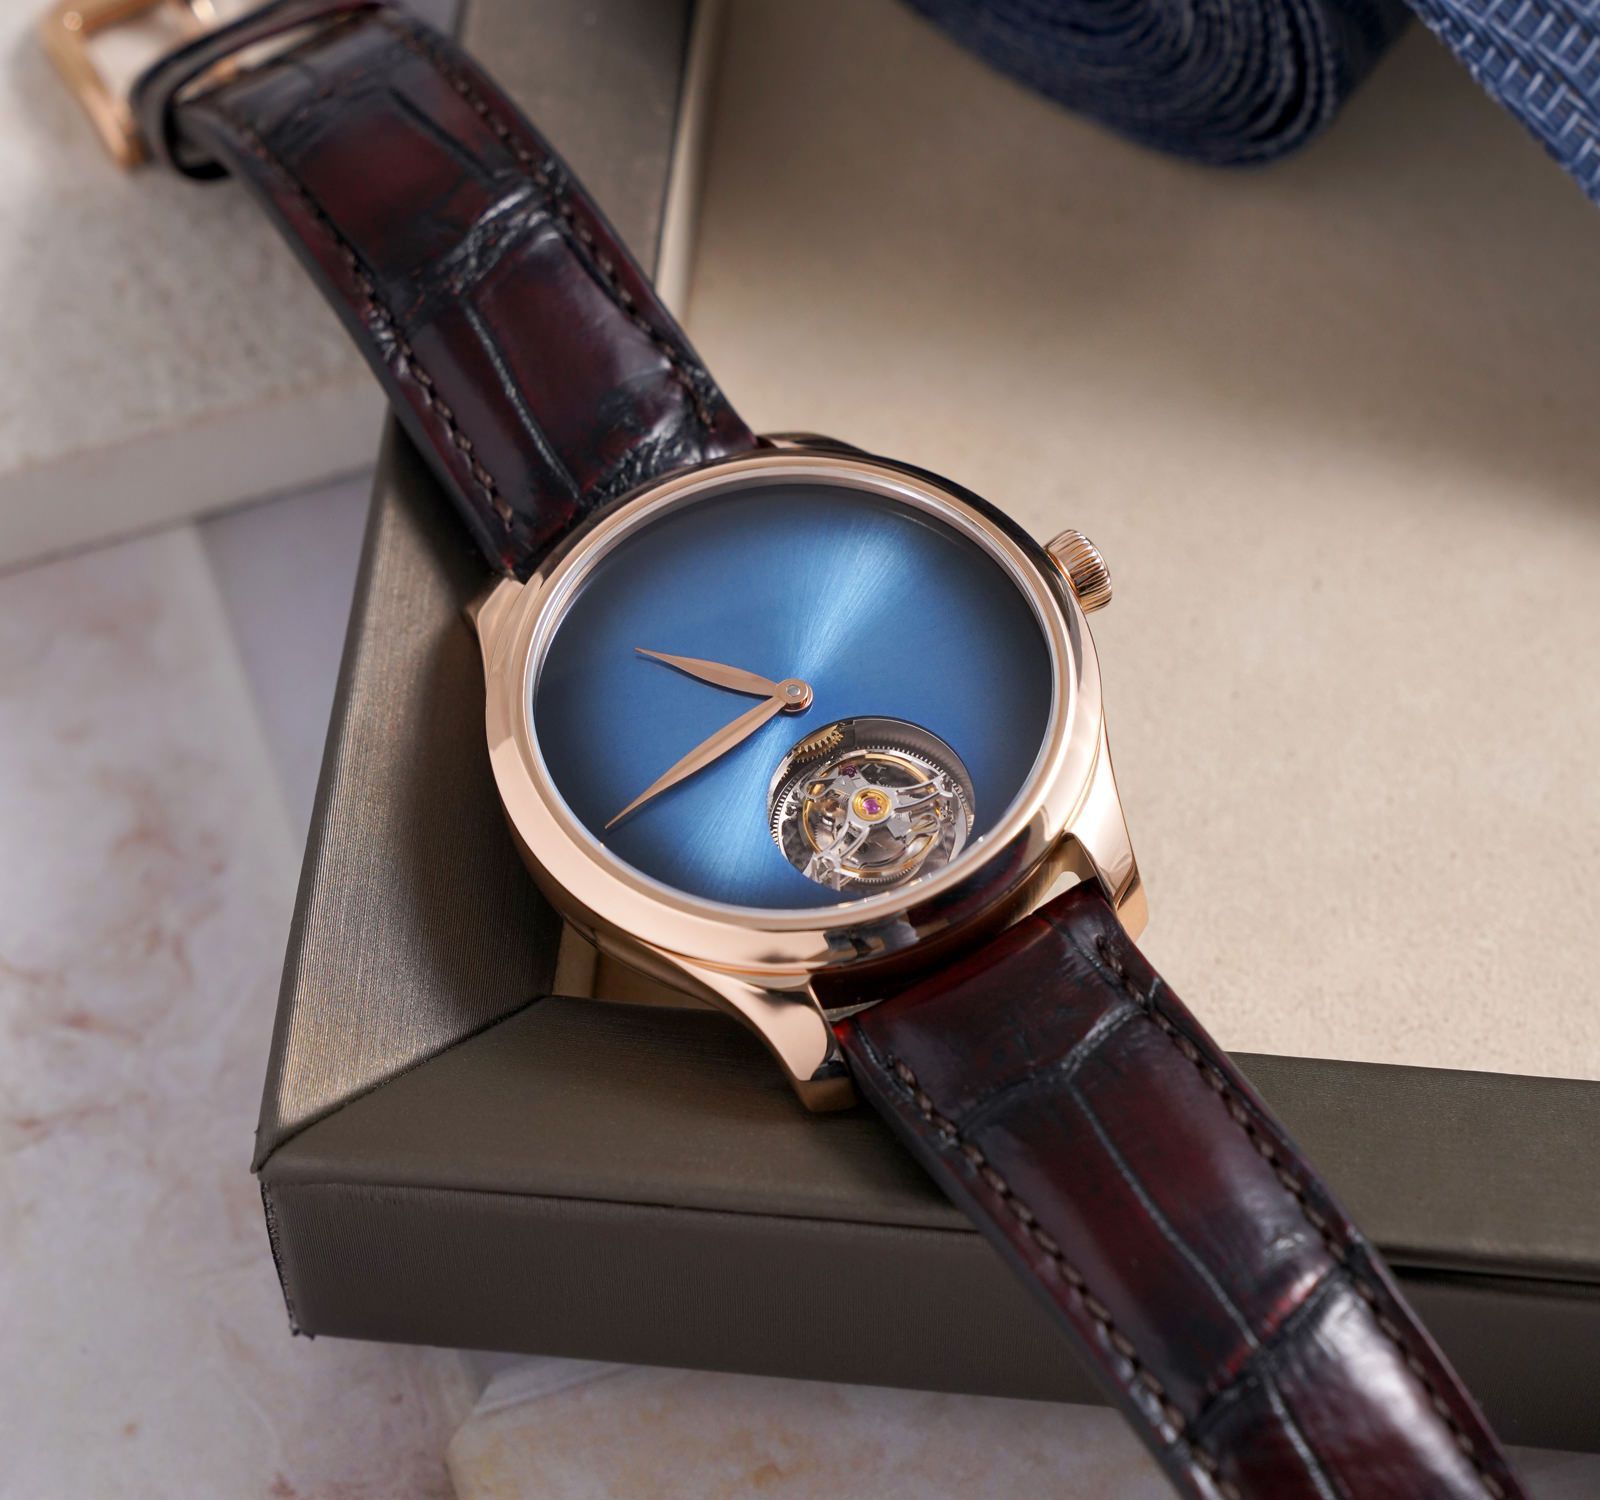 Pre-Owned H. Moser & Cie. 1804-400 Price